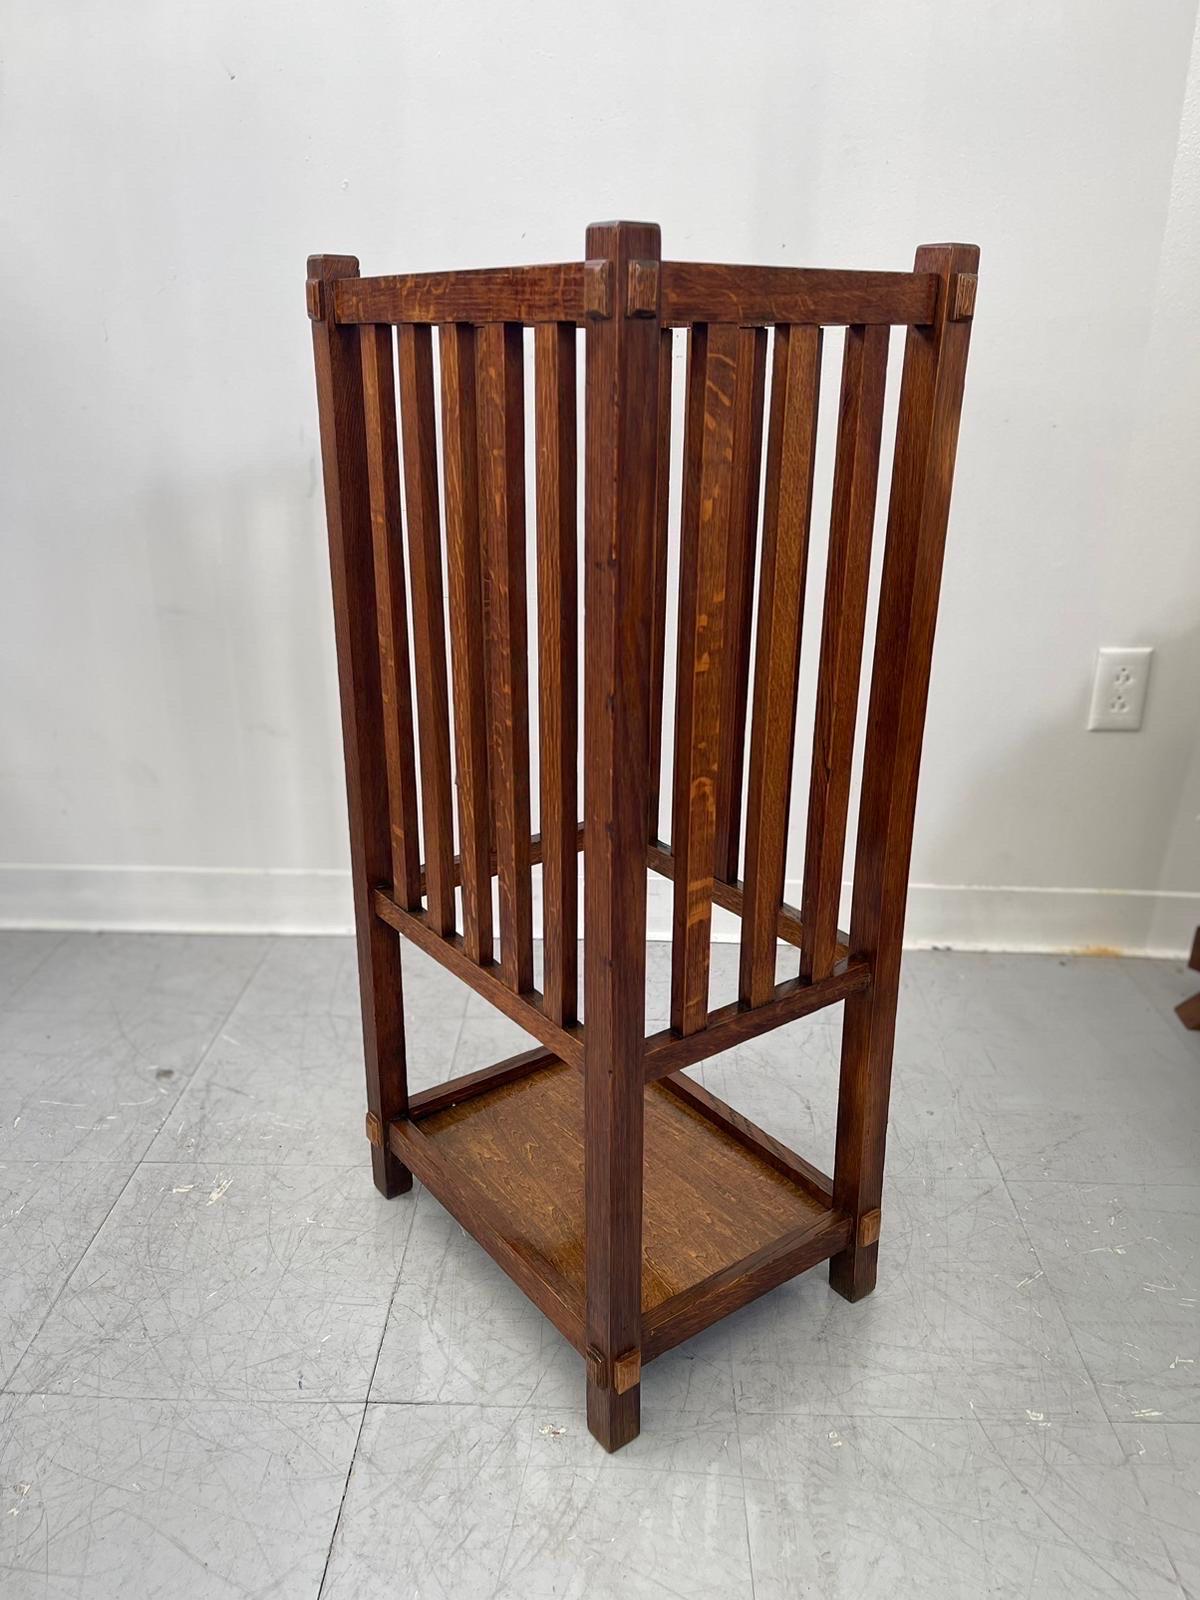 Vintage Wooden Umbrella Stand, No Makers Mark. Possibly Circa 1970. Vintage Condition Consistent with Age as Pictured.

Dimensions. 16 W ; 12 D ; 35 H